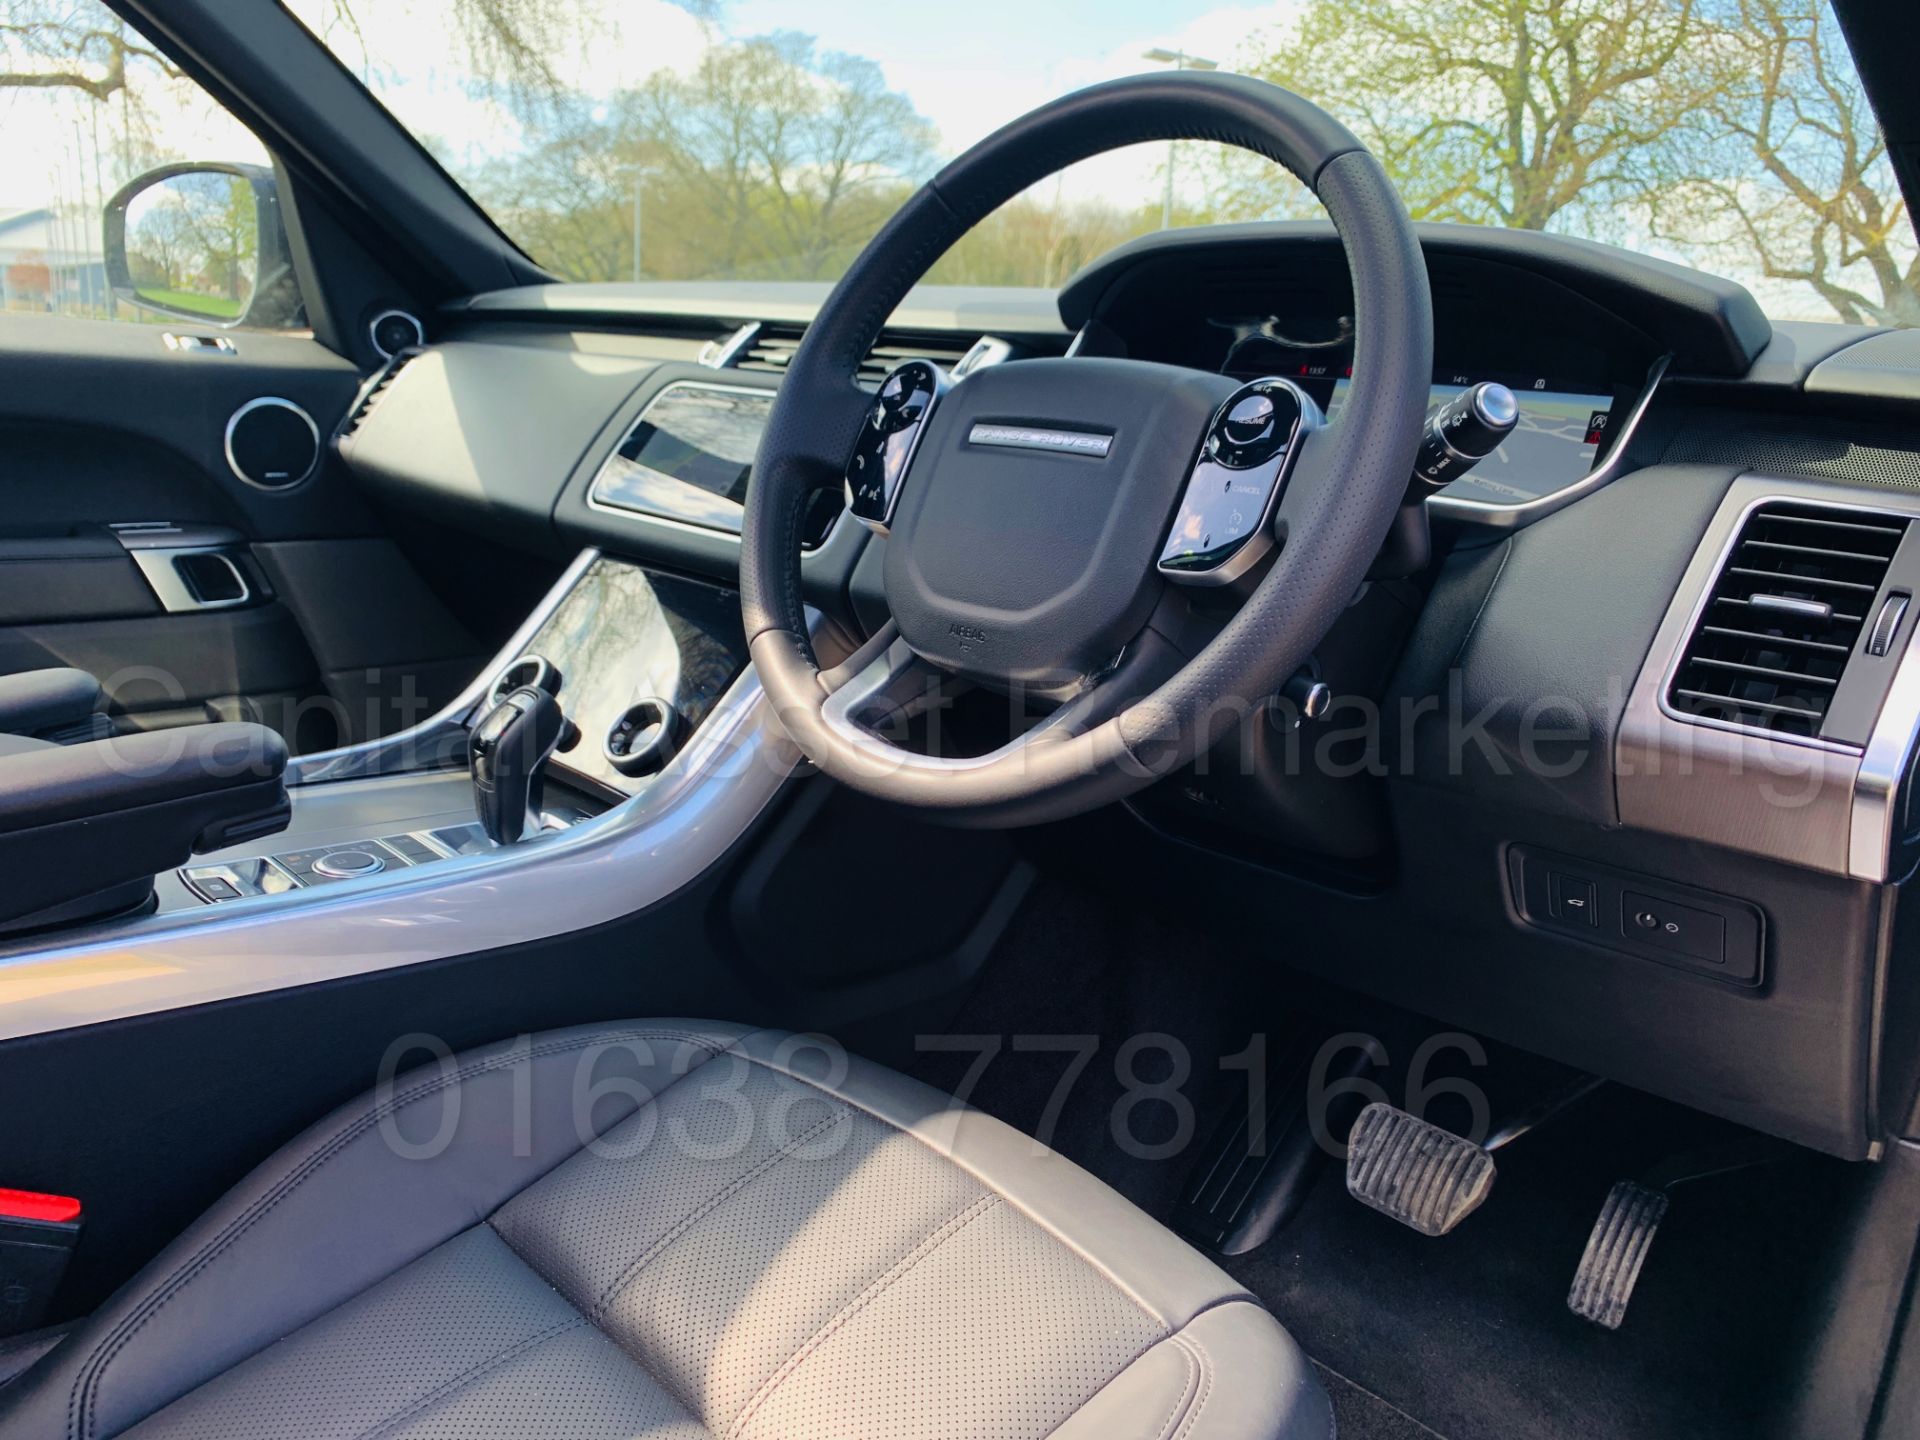 (ON SALE) RANGE ROVER SPORT *HSE* (2019 - ALL NEW MODEL) '3.0 SDV6 - 306 BHP - 8 SPEED AUTO' - Image 51 of 73